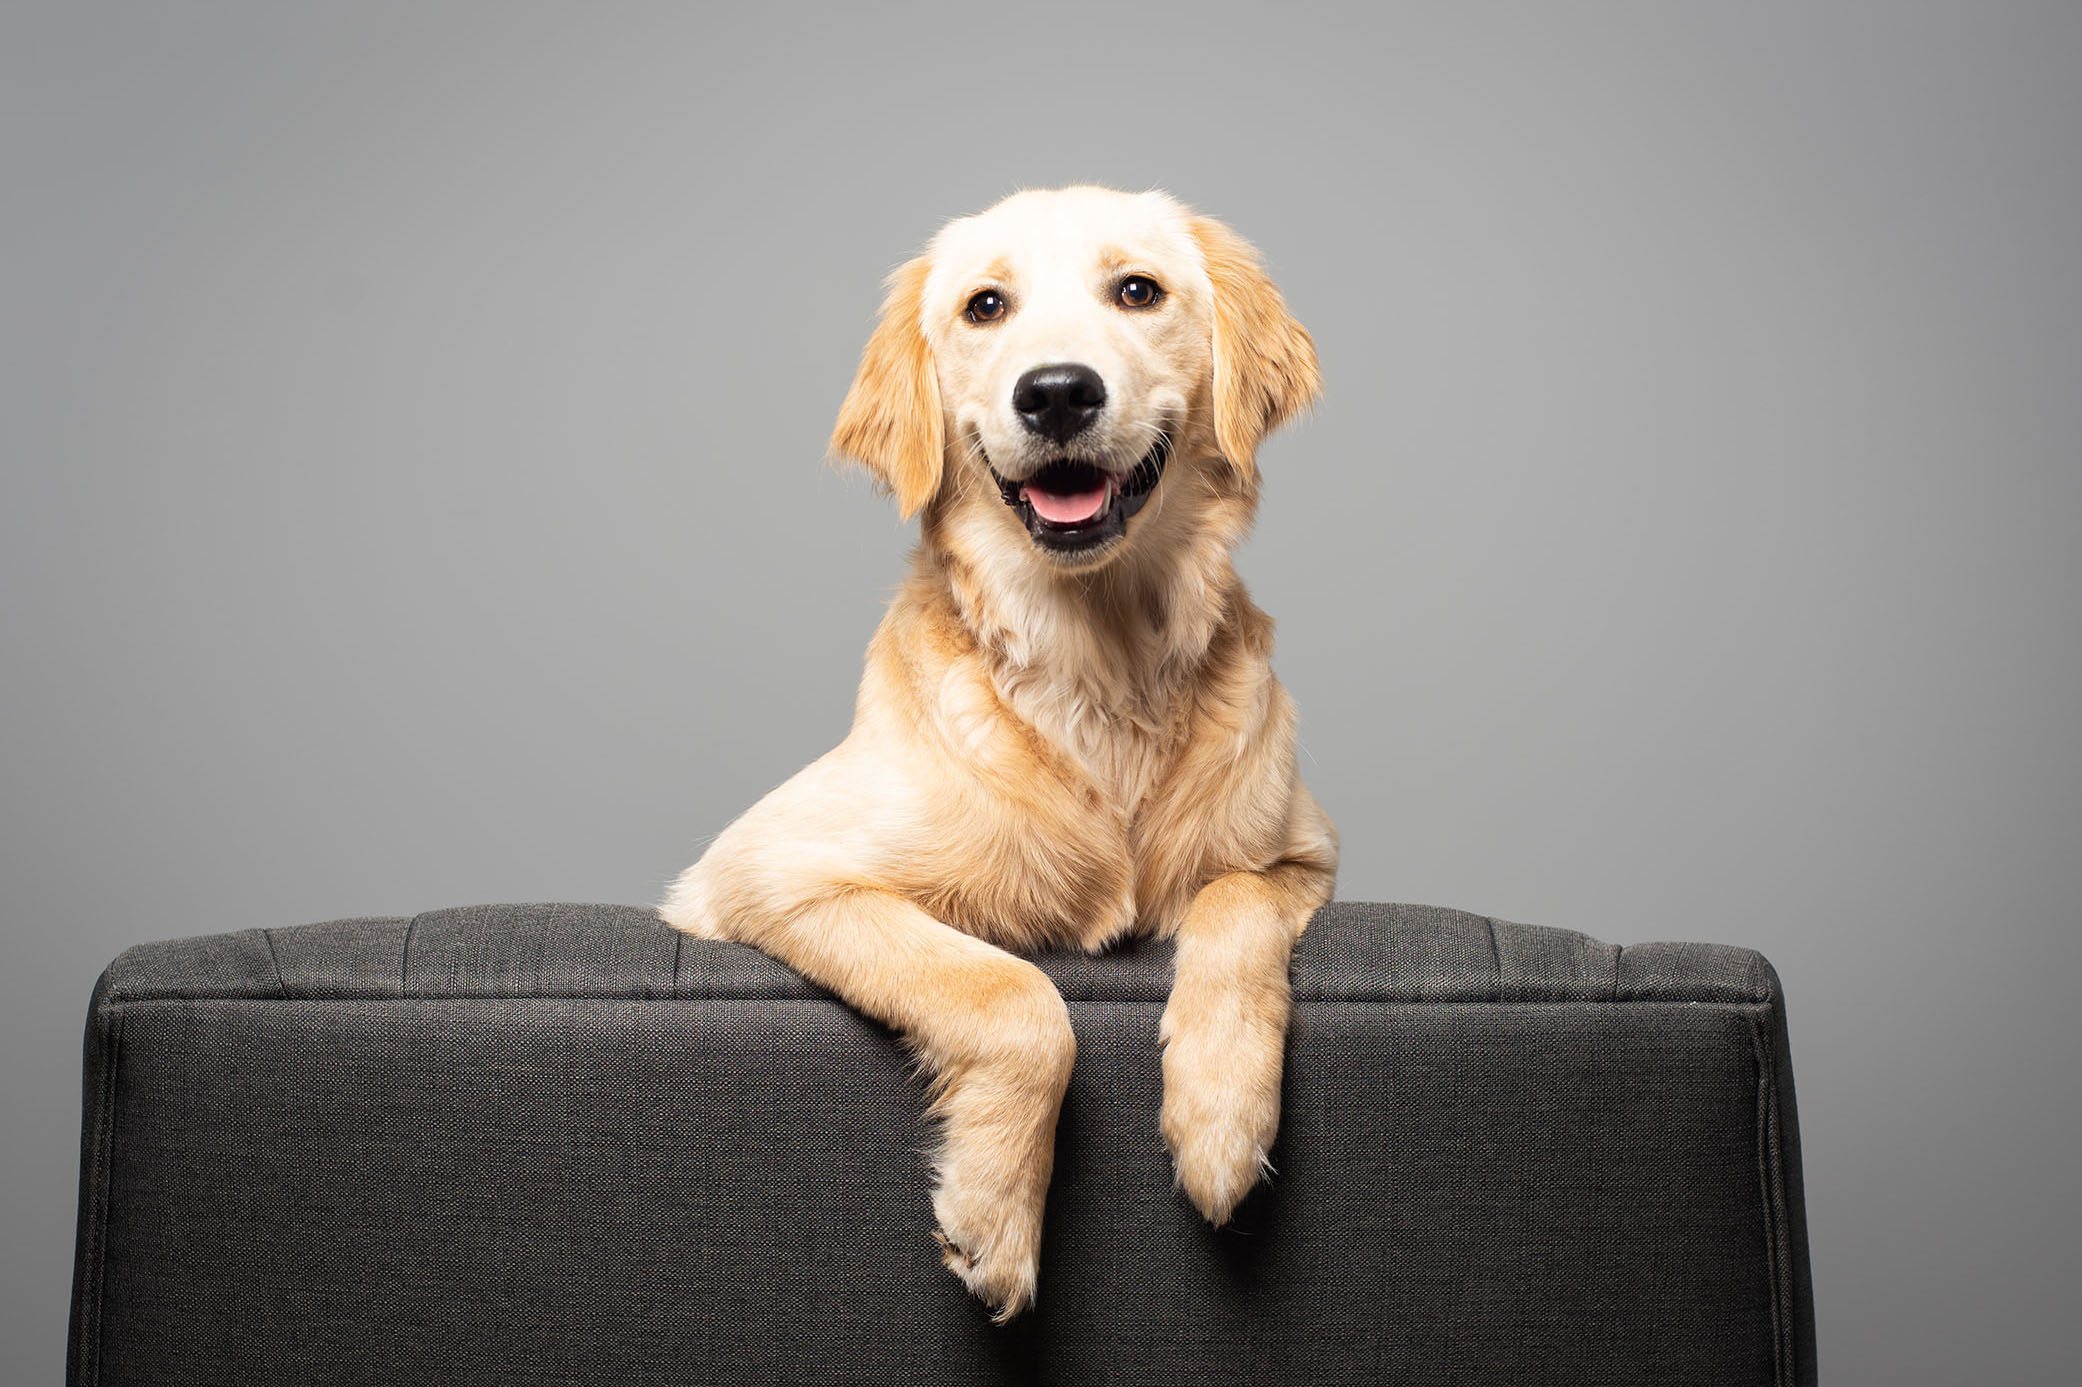 golden retriever perched on a chair.